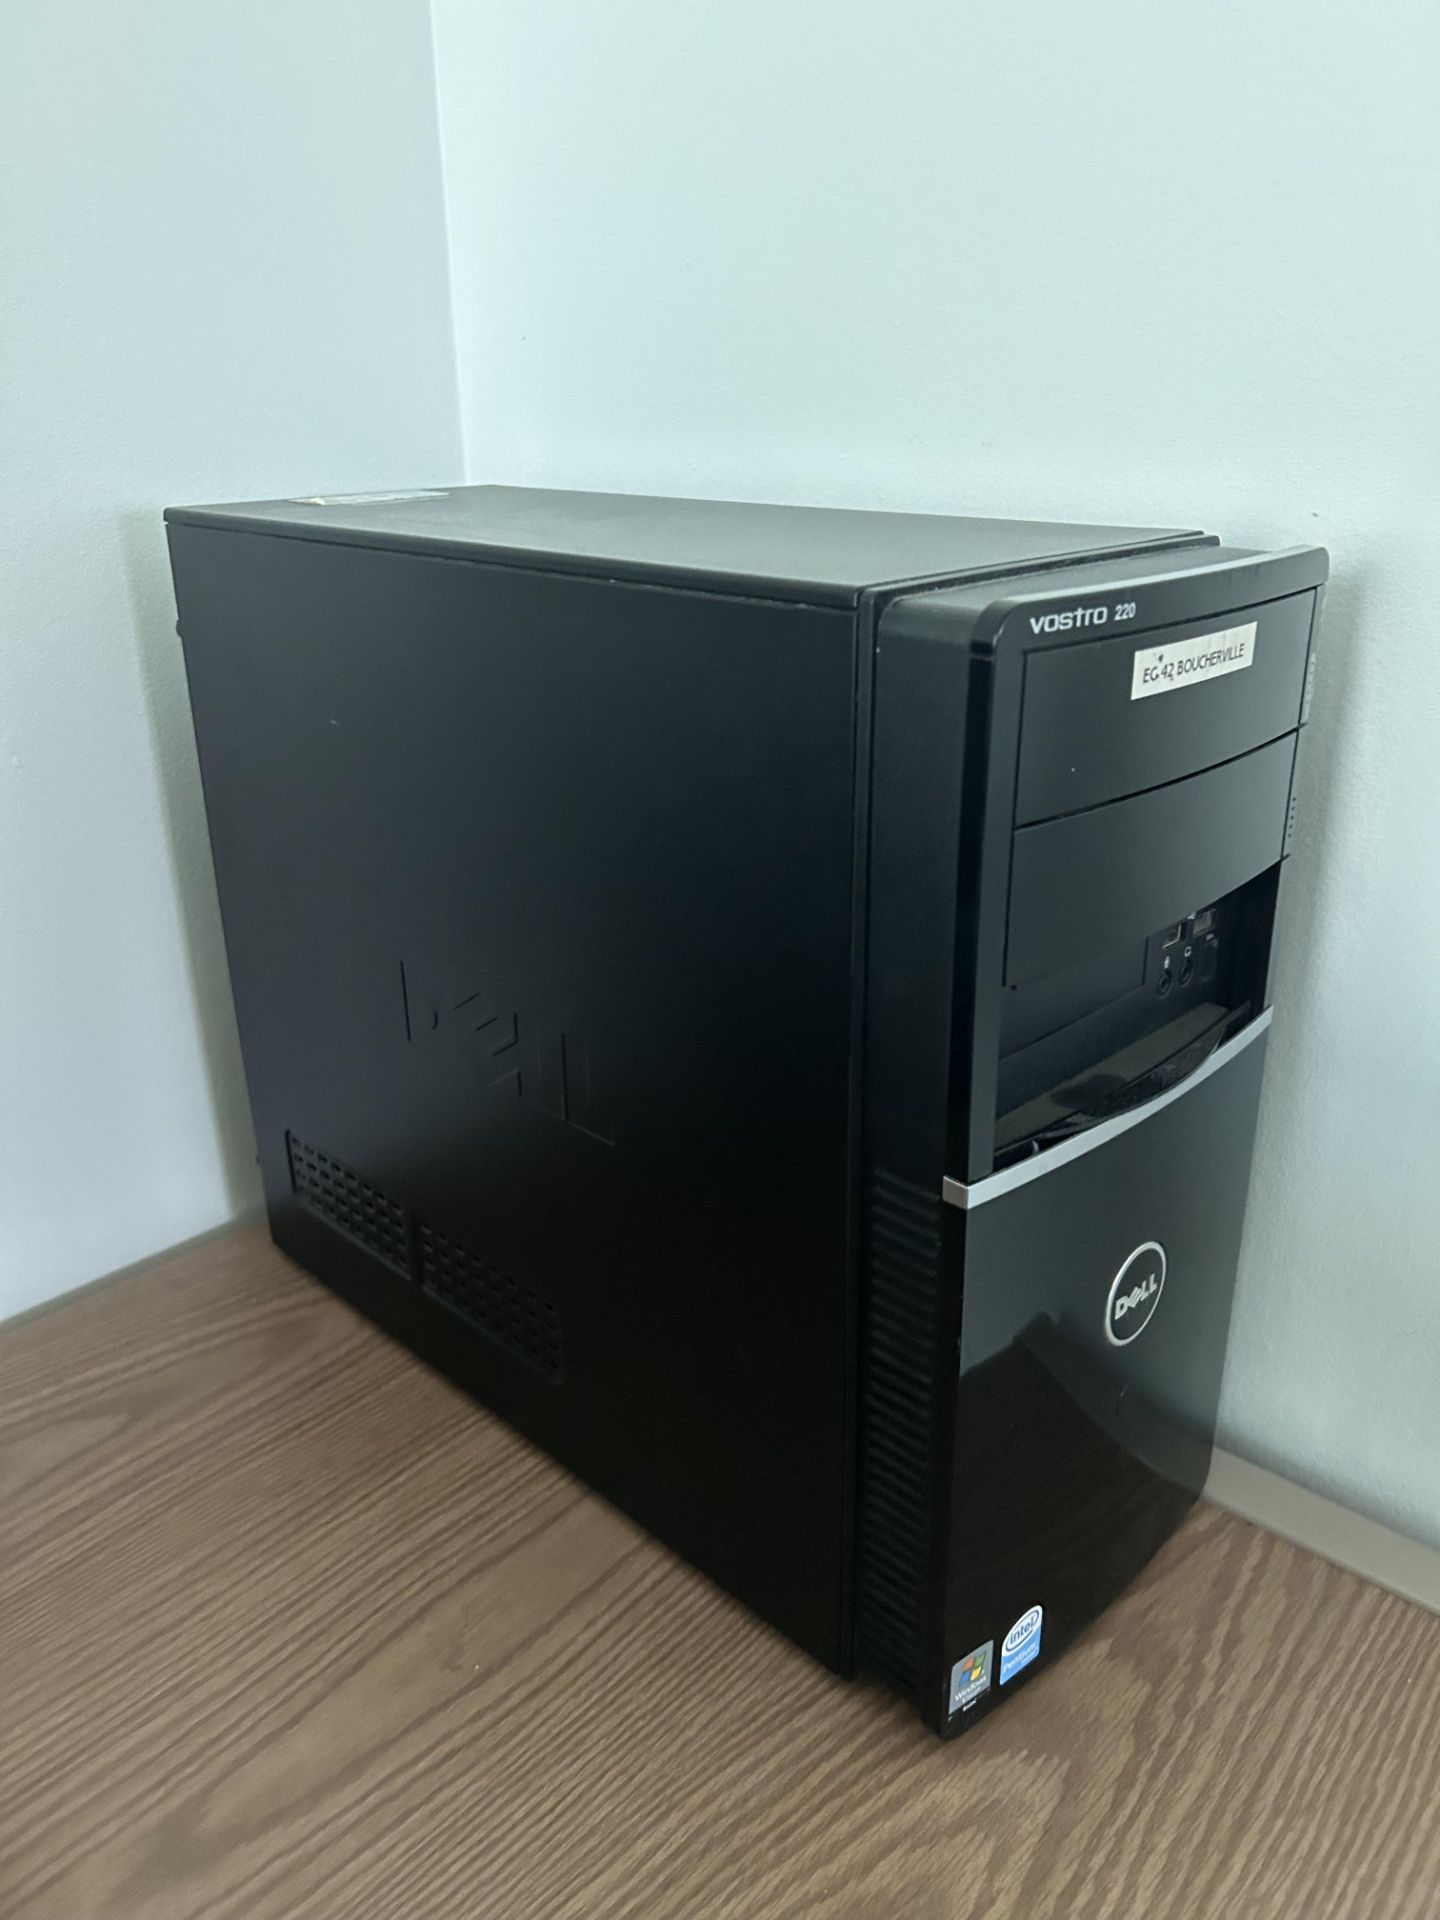 Lot of (1) THINKCENTRE Tower and (1) DELL Vostro 220 tower - Image 7 of 9